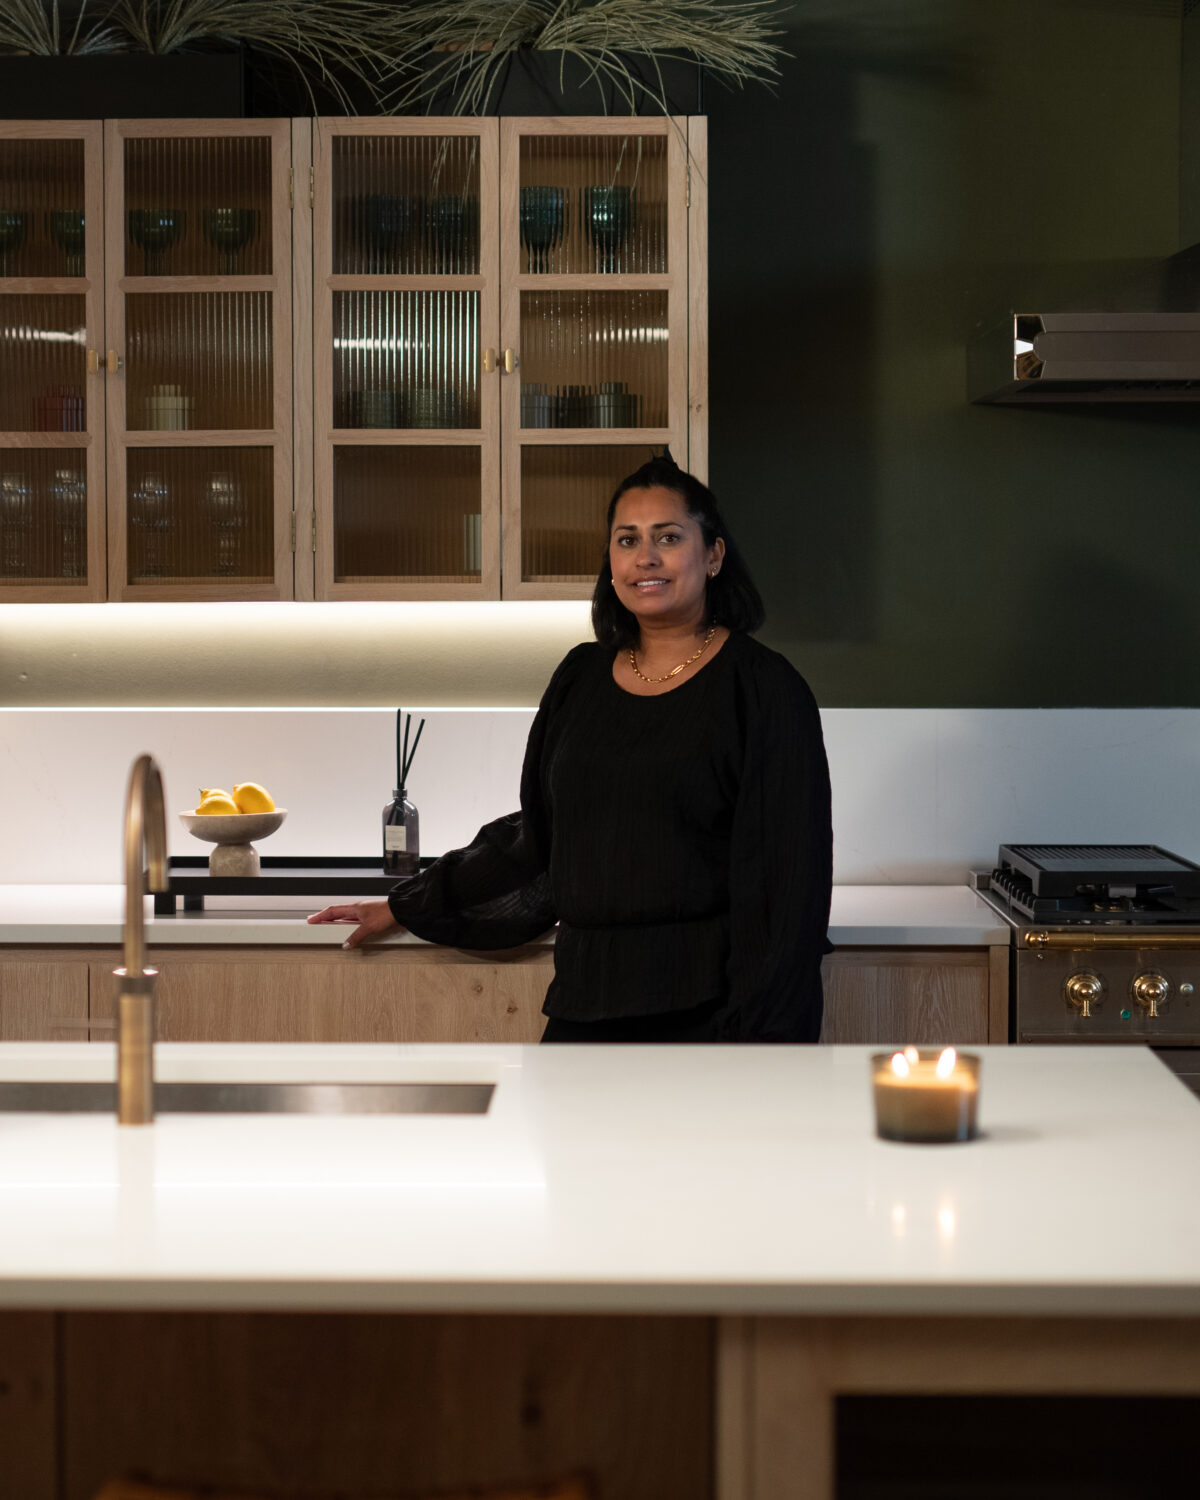 Reena Simon pictured in the collaboration display kitchen